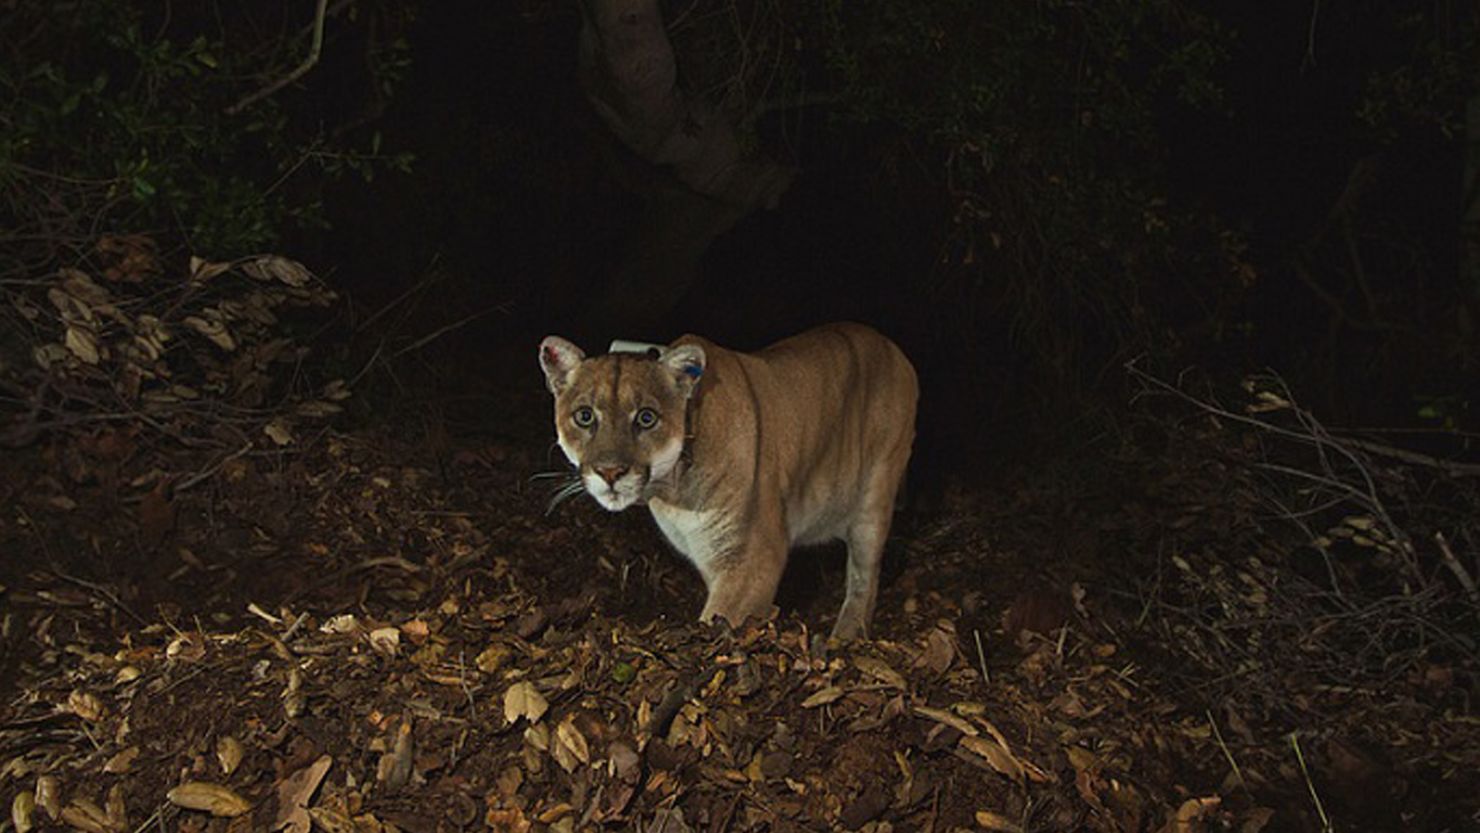 Male mountain lion P-22 attacked and killed a pet chihuahua mix, according to the National Park Service.